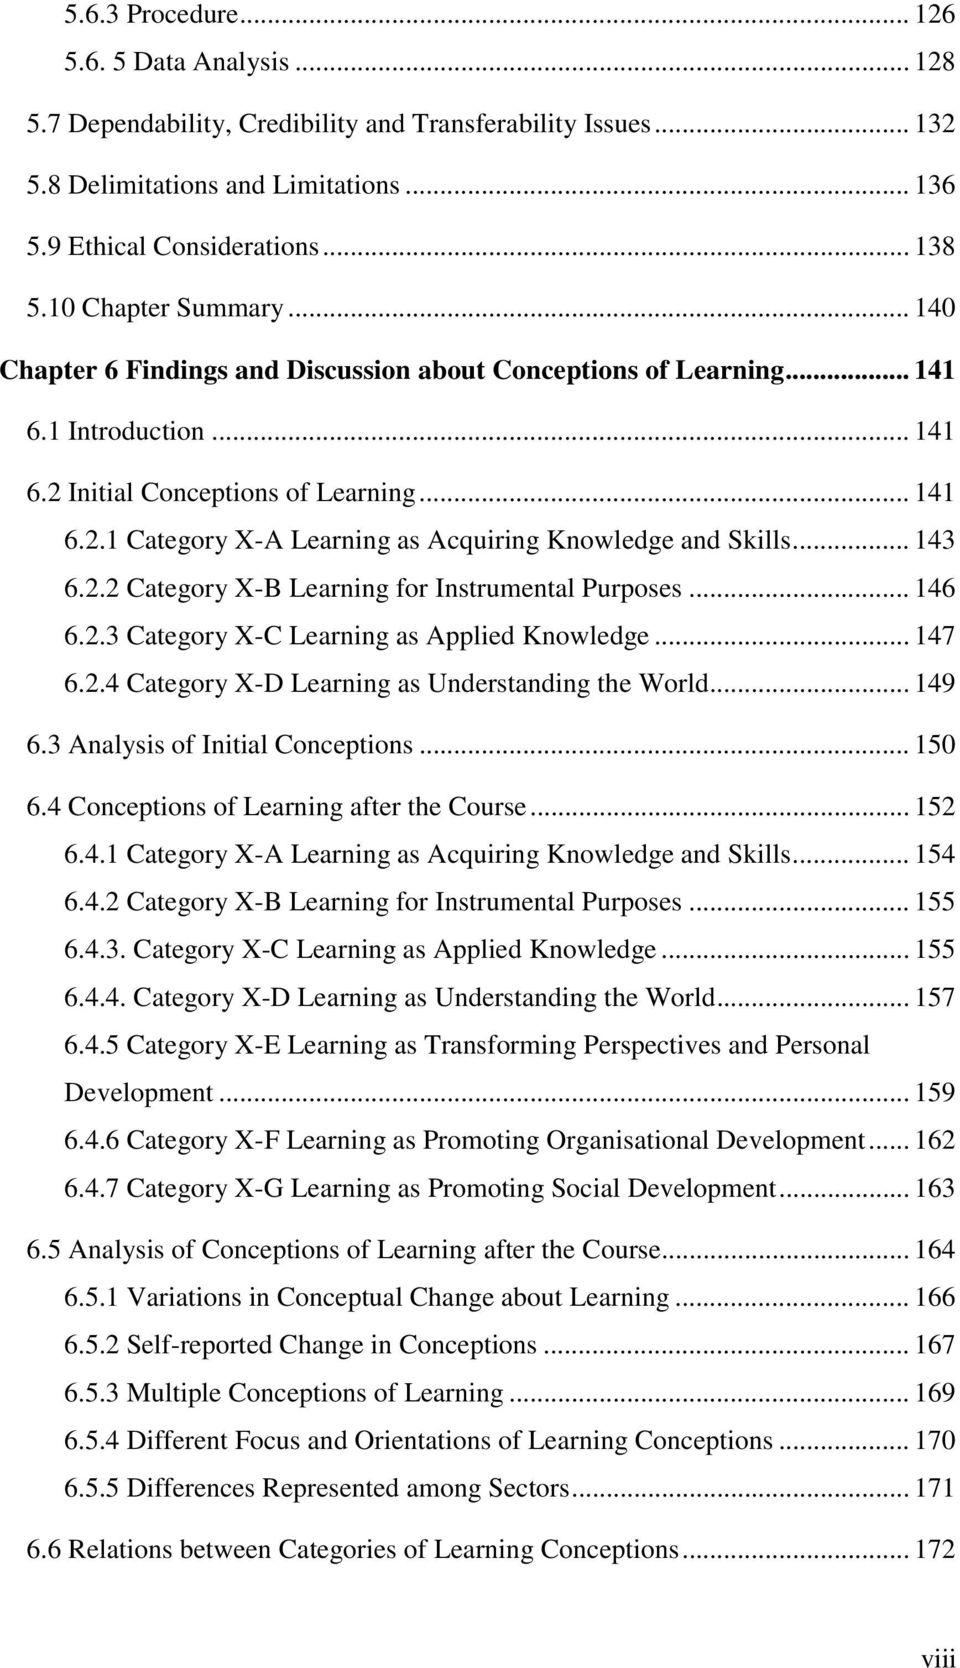 .. 143 6.2.2 Category X-B Learning for Instrumental Purposes... 146 6.2.3 Category X-C Learning as Applied Knowledge... 147 6.2.4 Category X-D Learning as Understanding the World... 149 6.